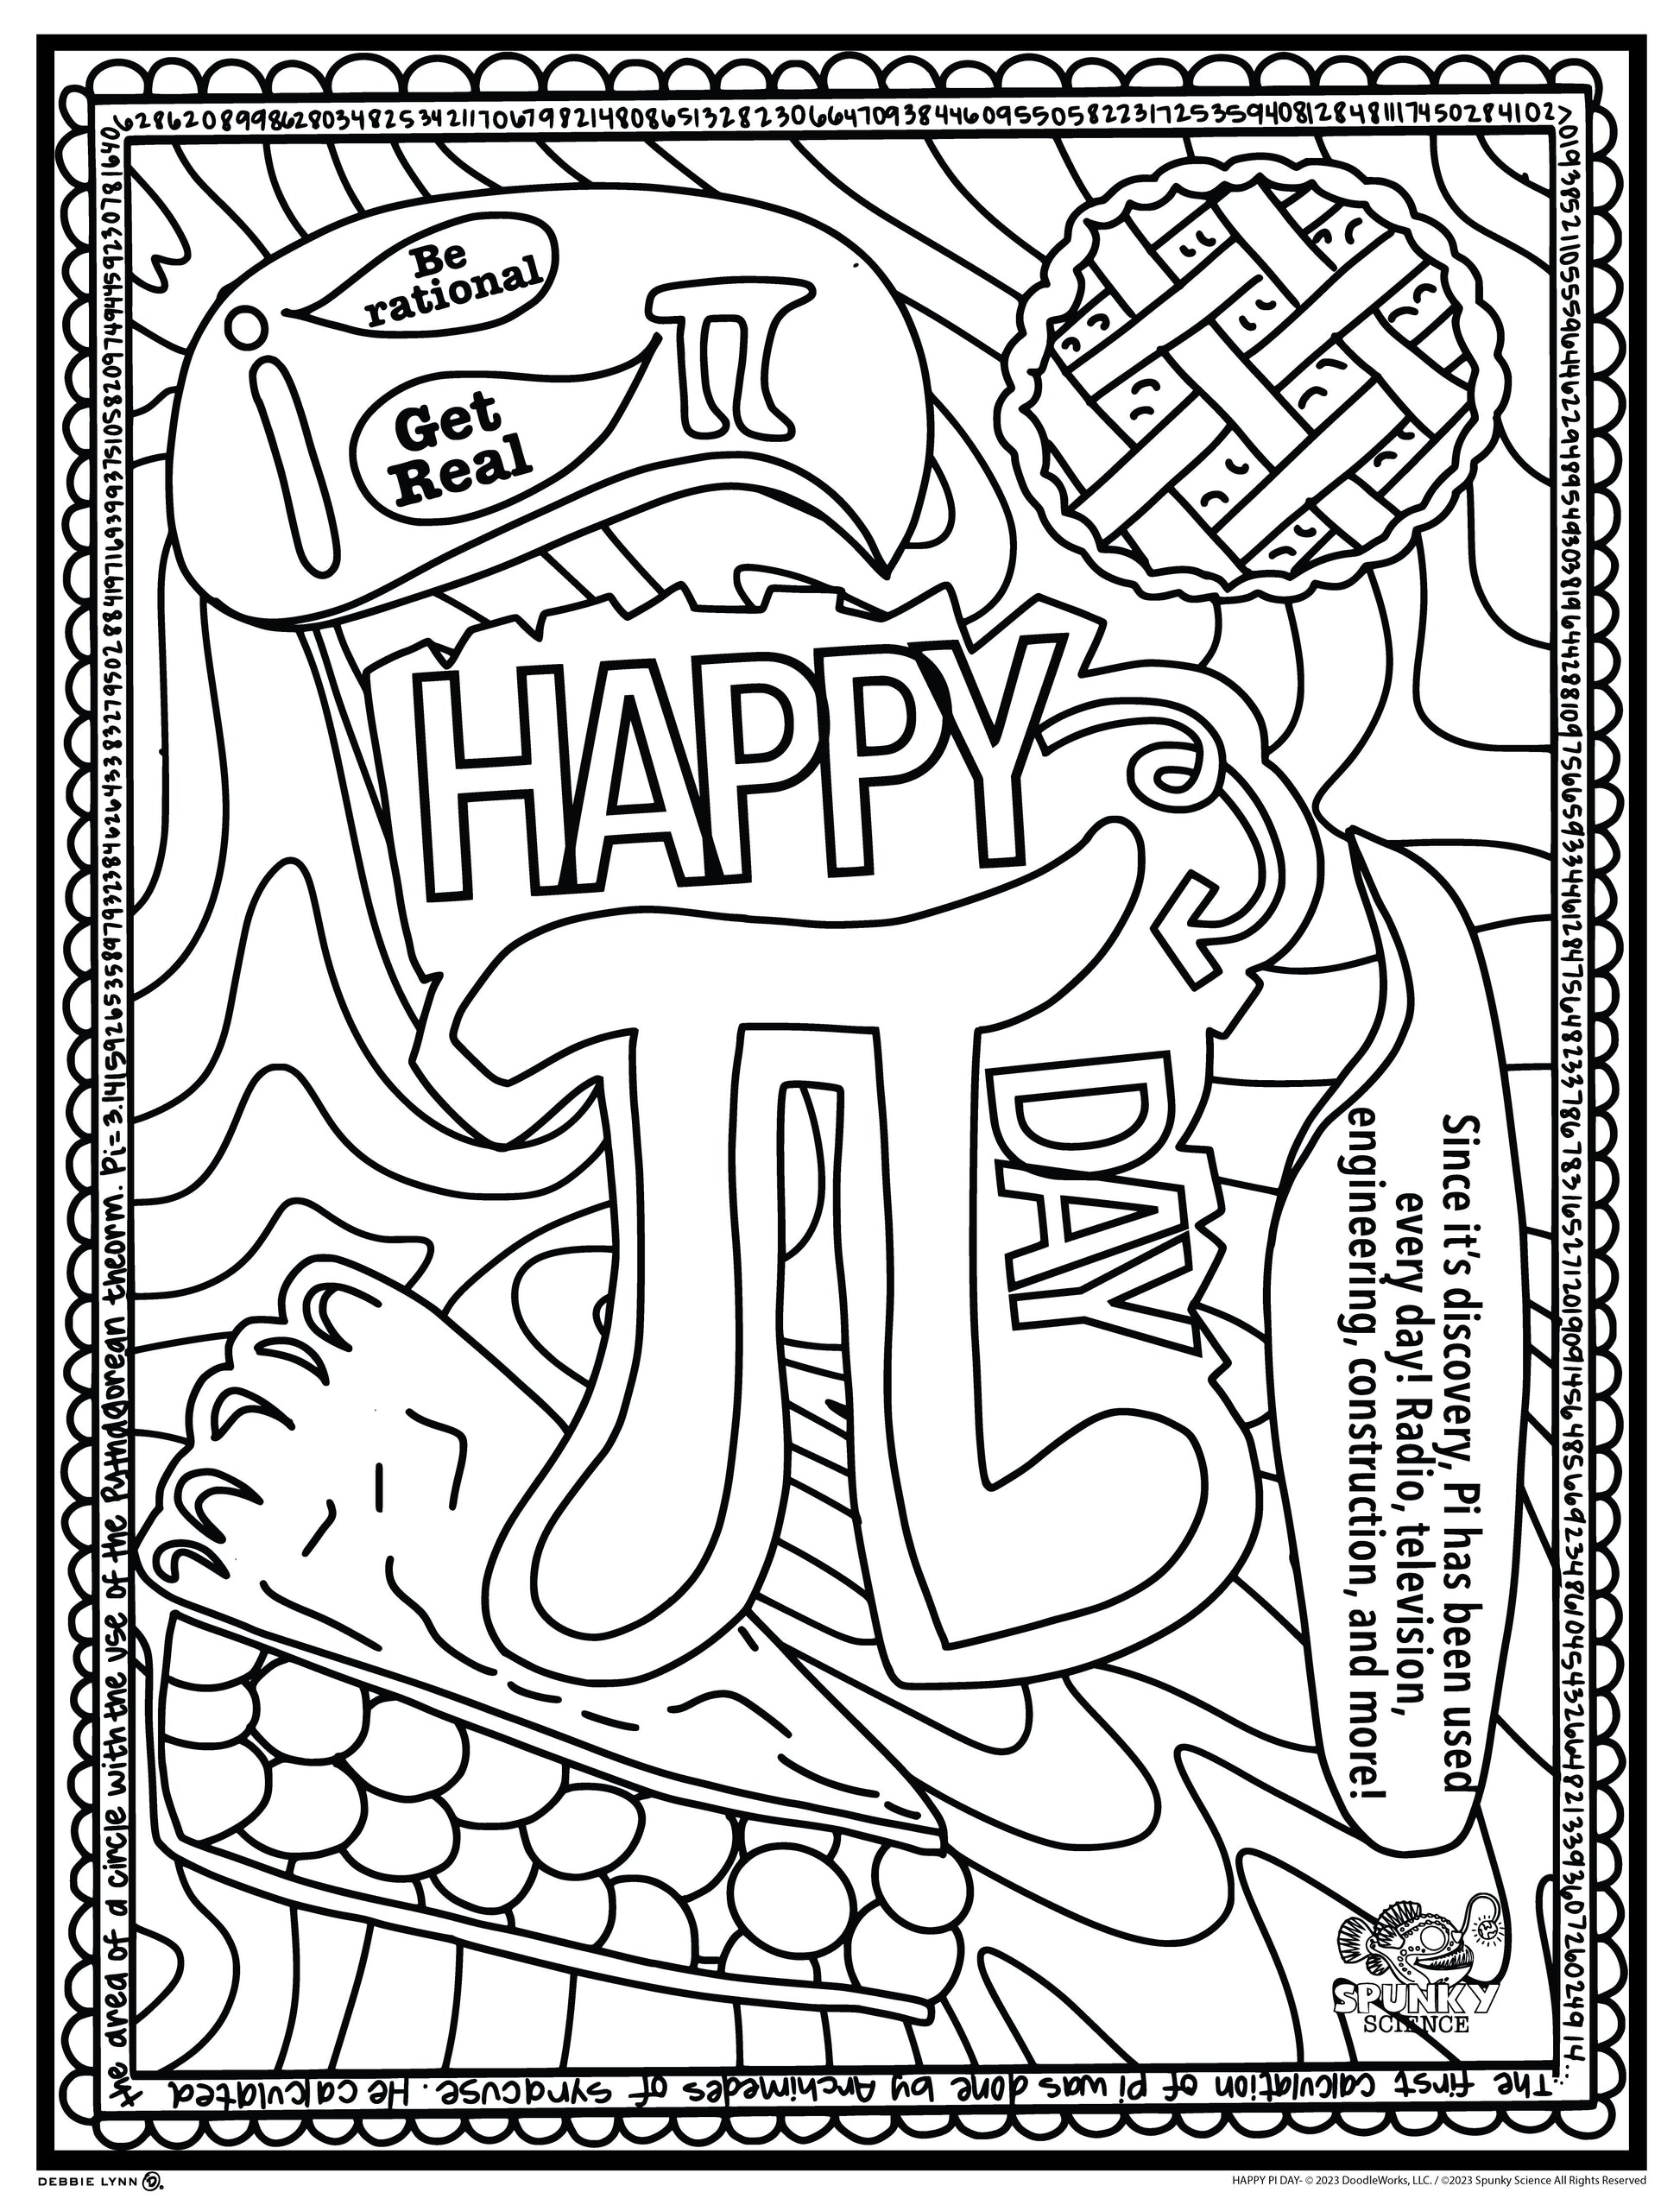 Happy pi day spunky science personalized giant coloring poster x â debbie lynn